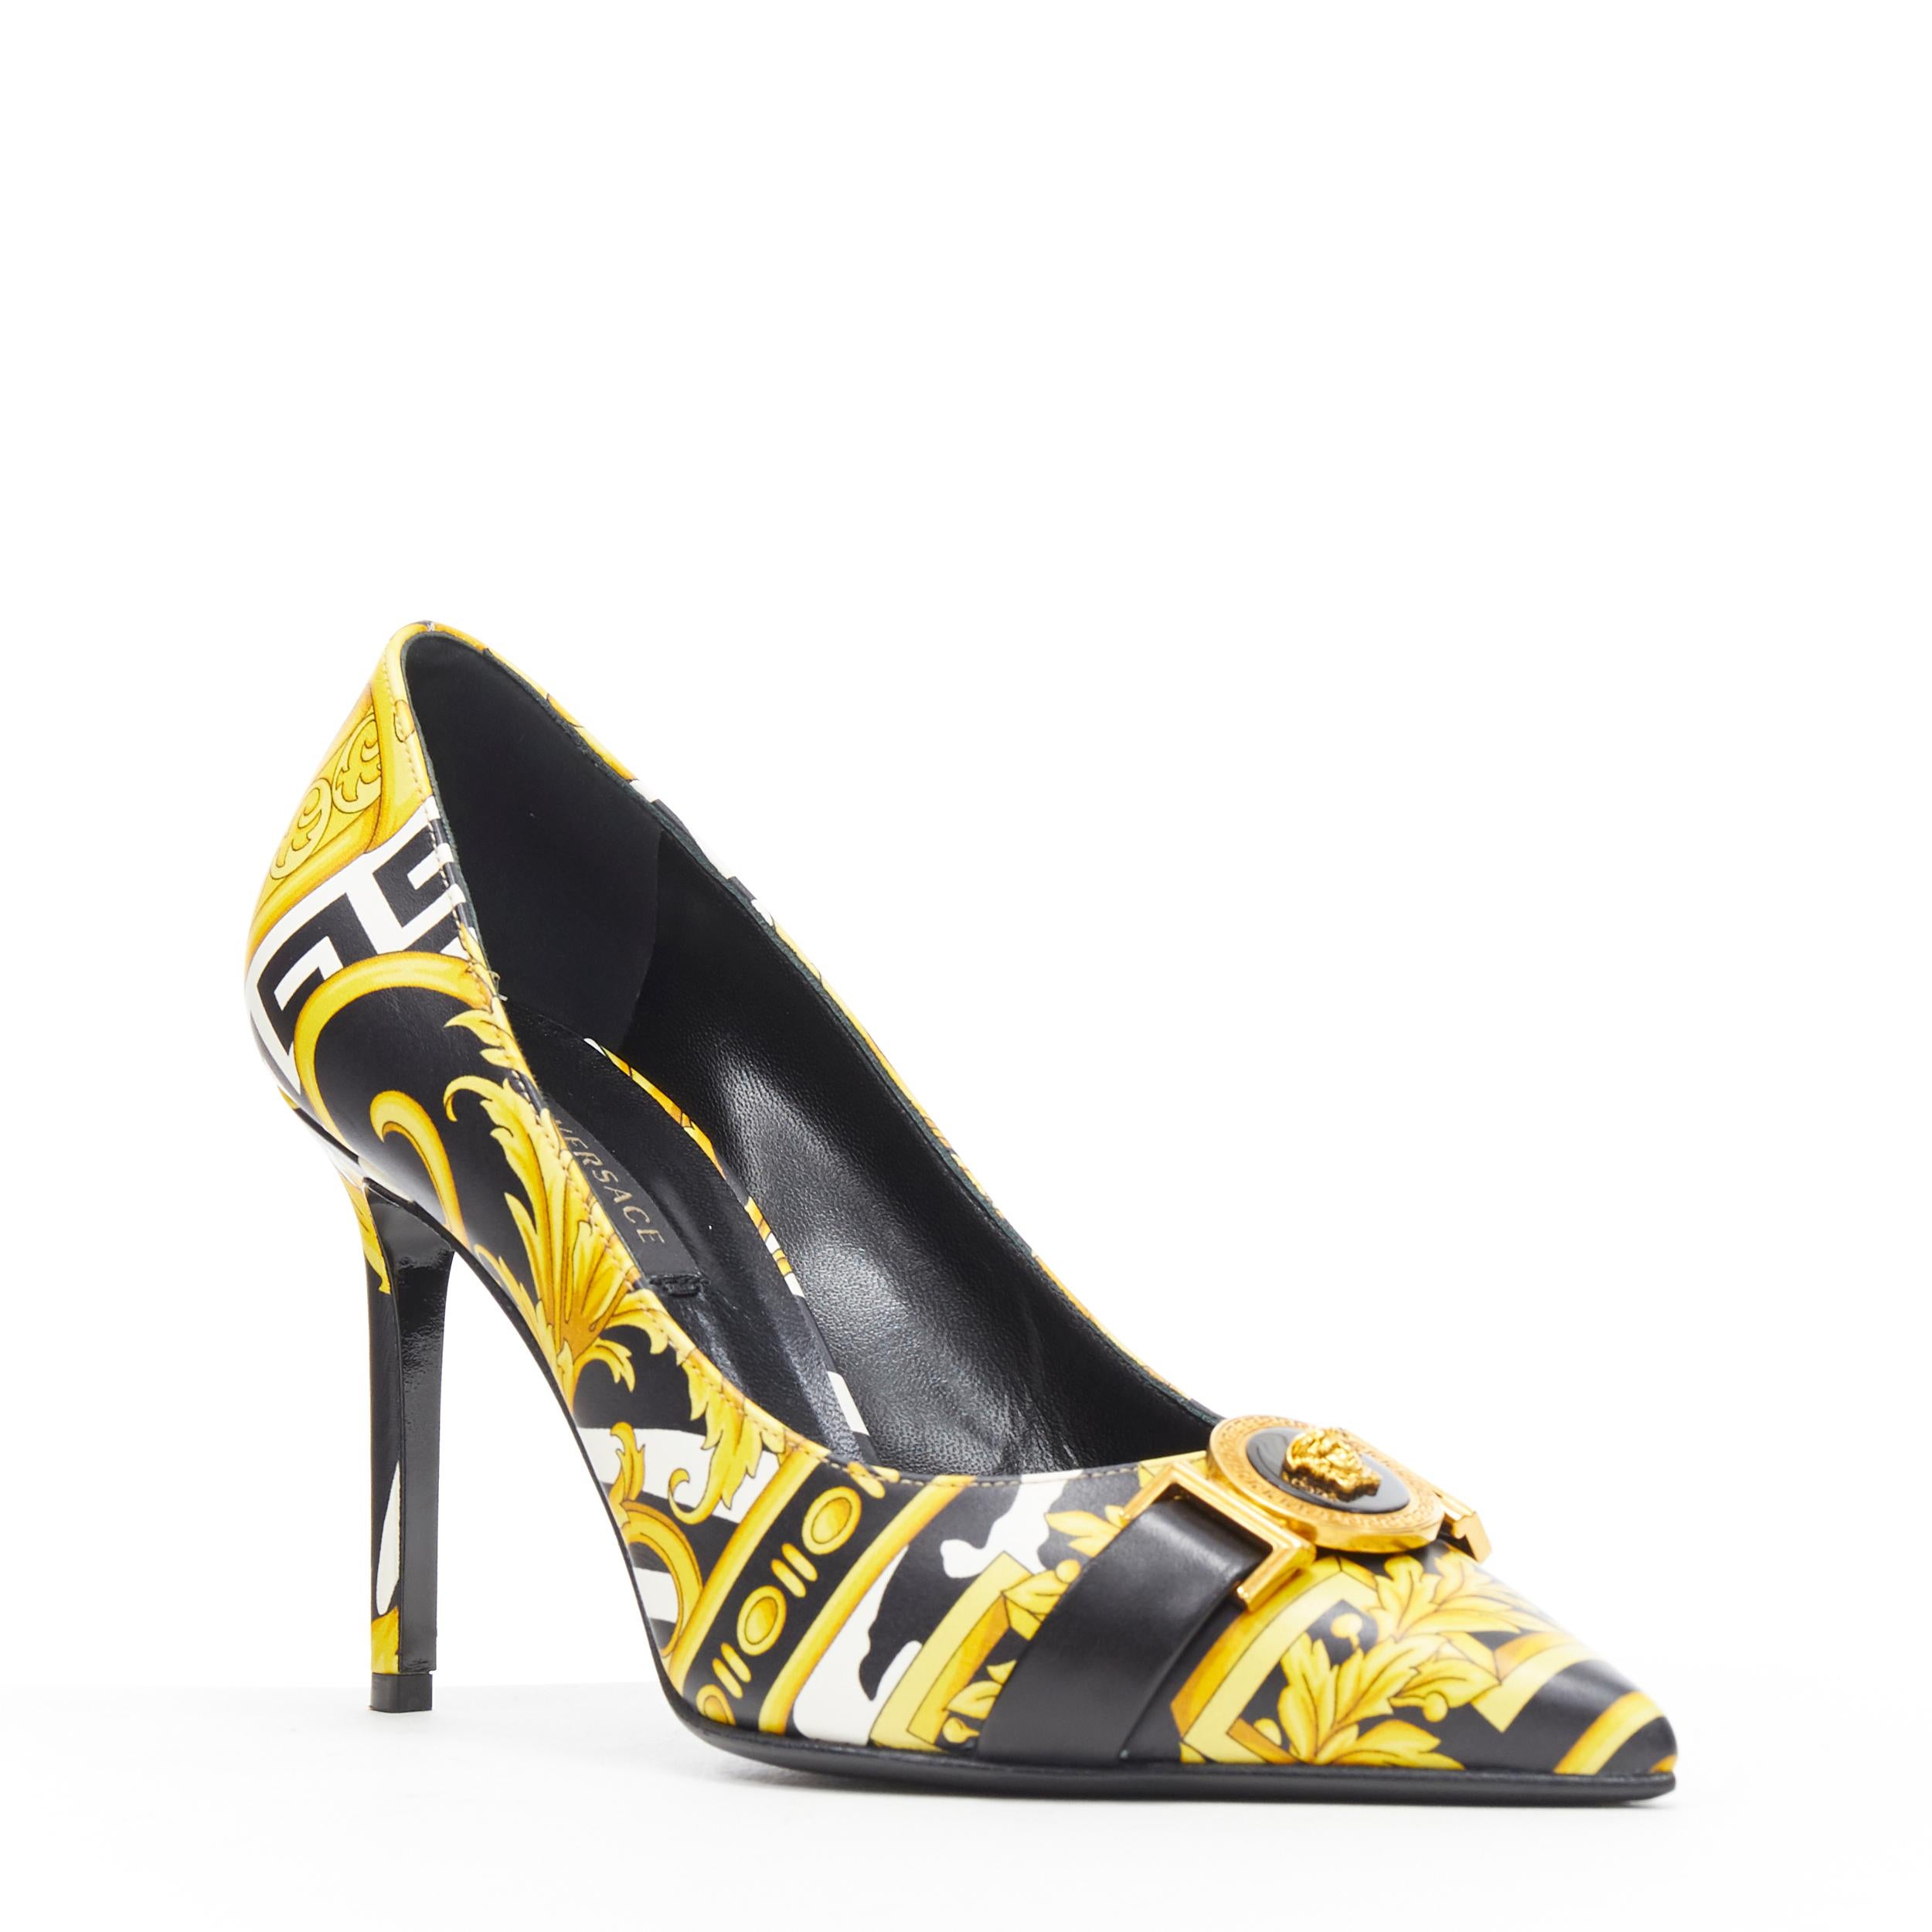 new VERSACE Savage Barocco gold wild zebra Medusa strap pointy leather heel EU38
Brand: Versace
Designer: Donatella Versace
Collection: 2019
Model Name / Style: Baroque pump
Material: Leather
Color: Gold, black
Pattern: Floral
Extra Detail: Savage